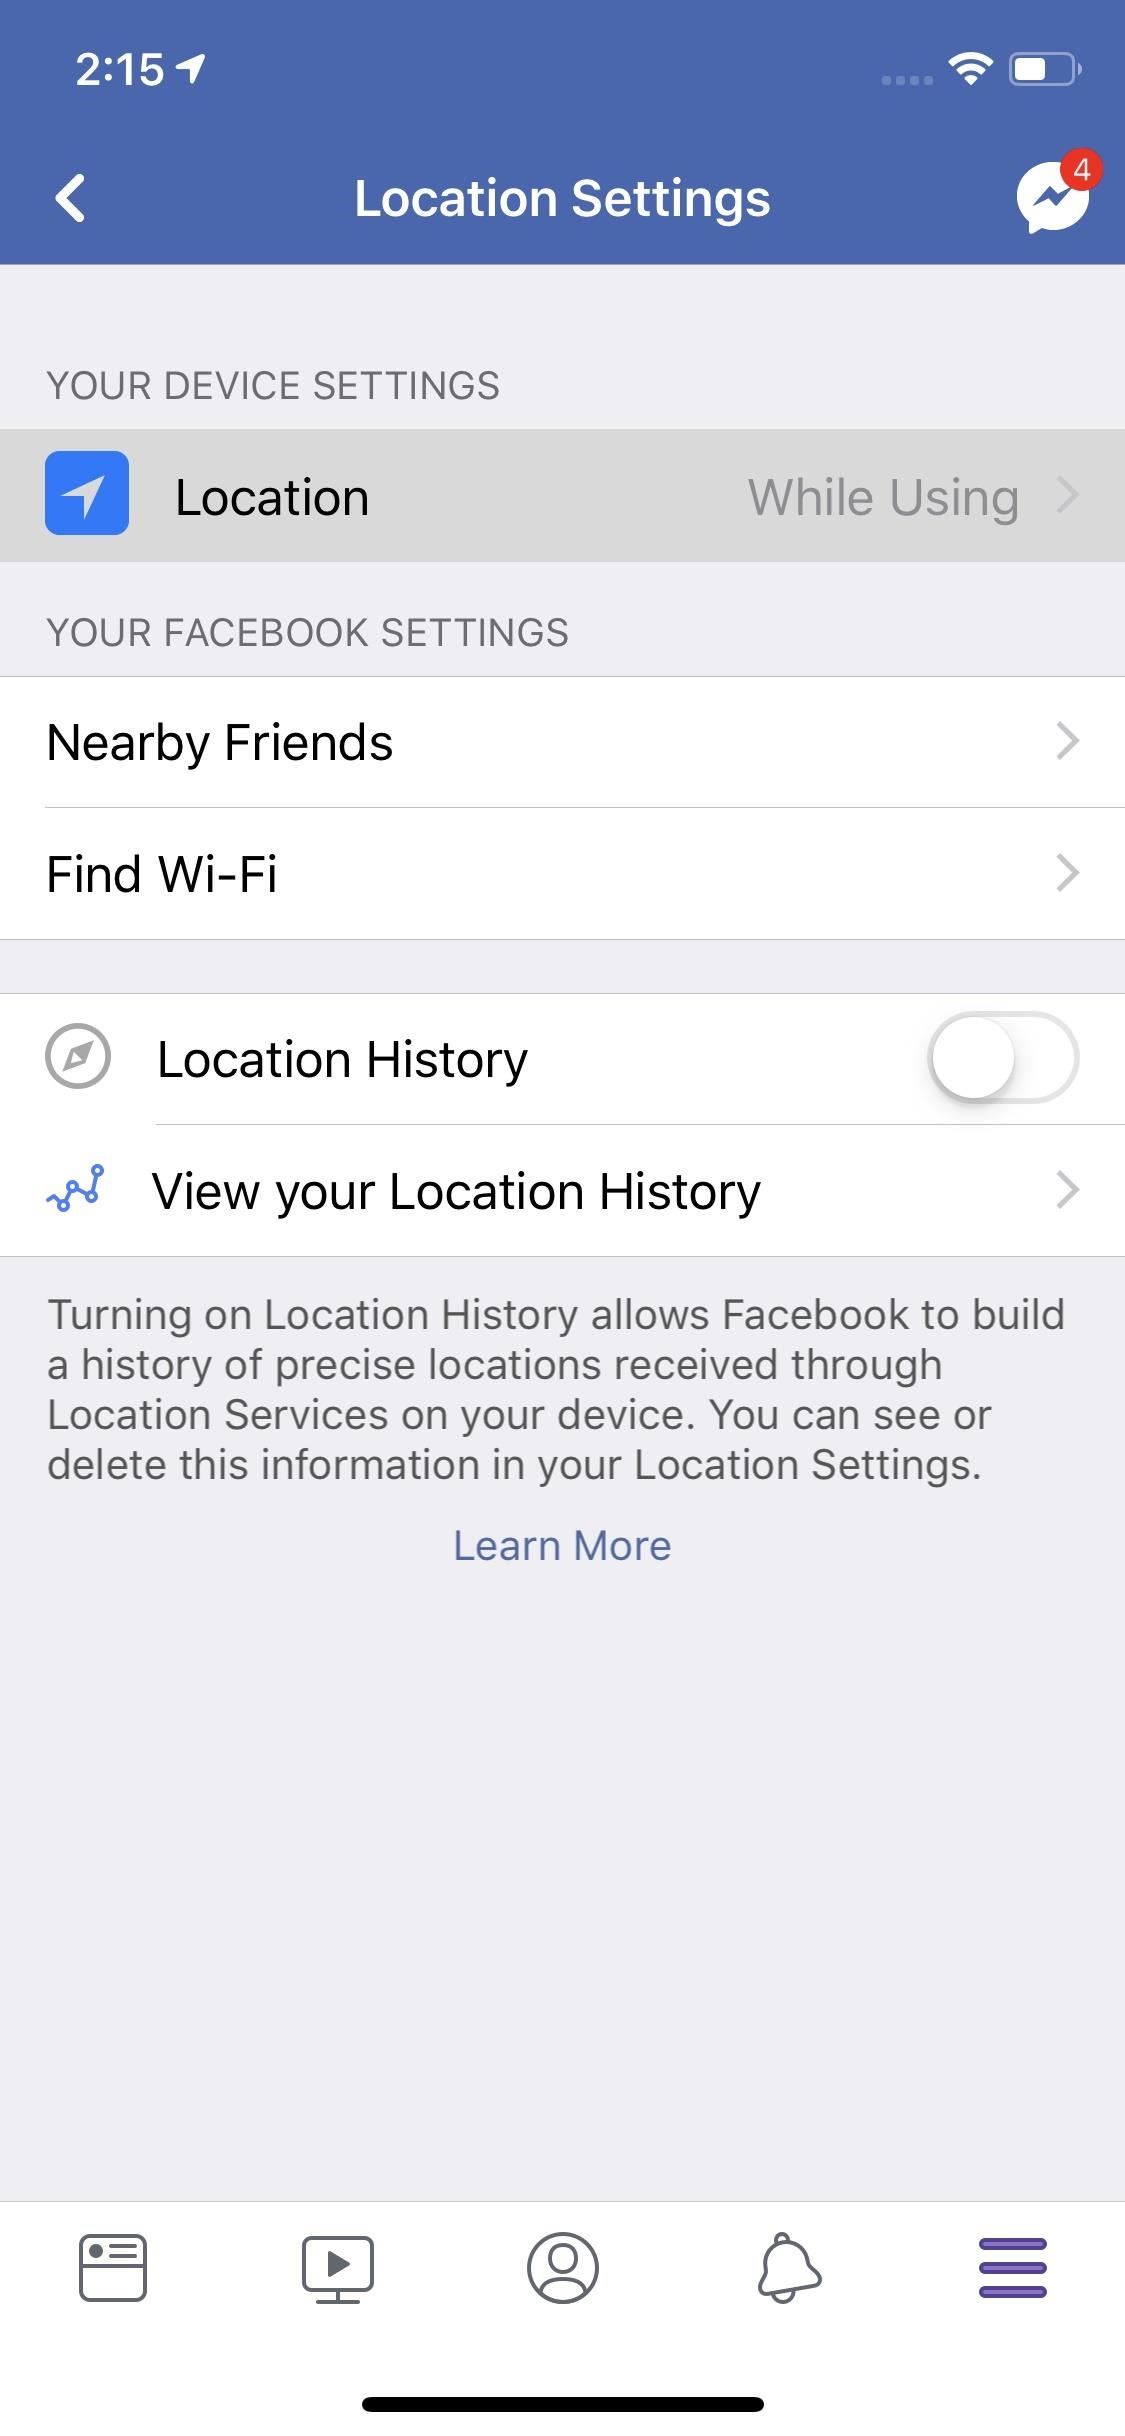 How to Keep Facebook from Tracking Your Location When You're Not Using the App